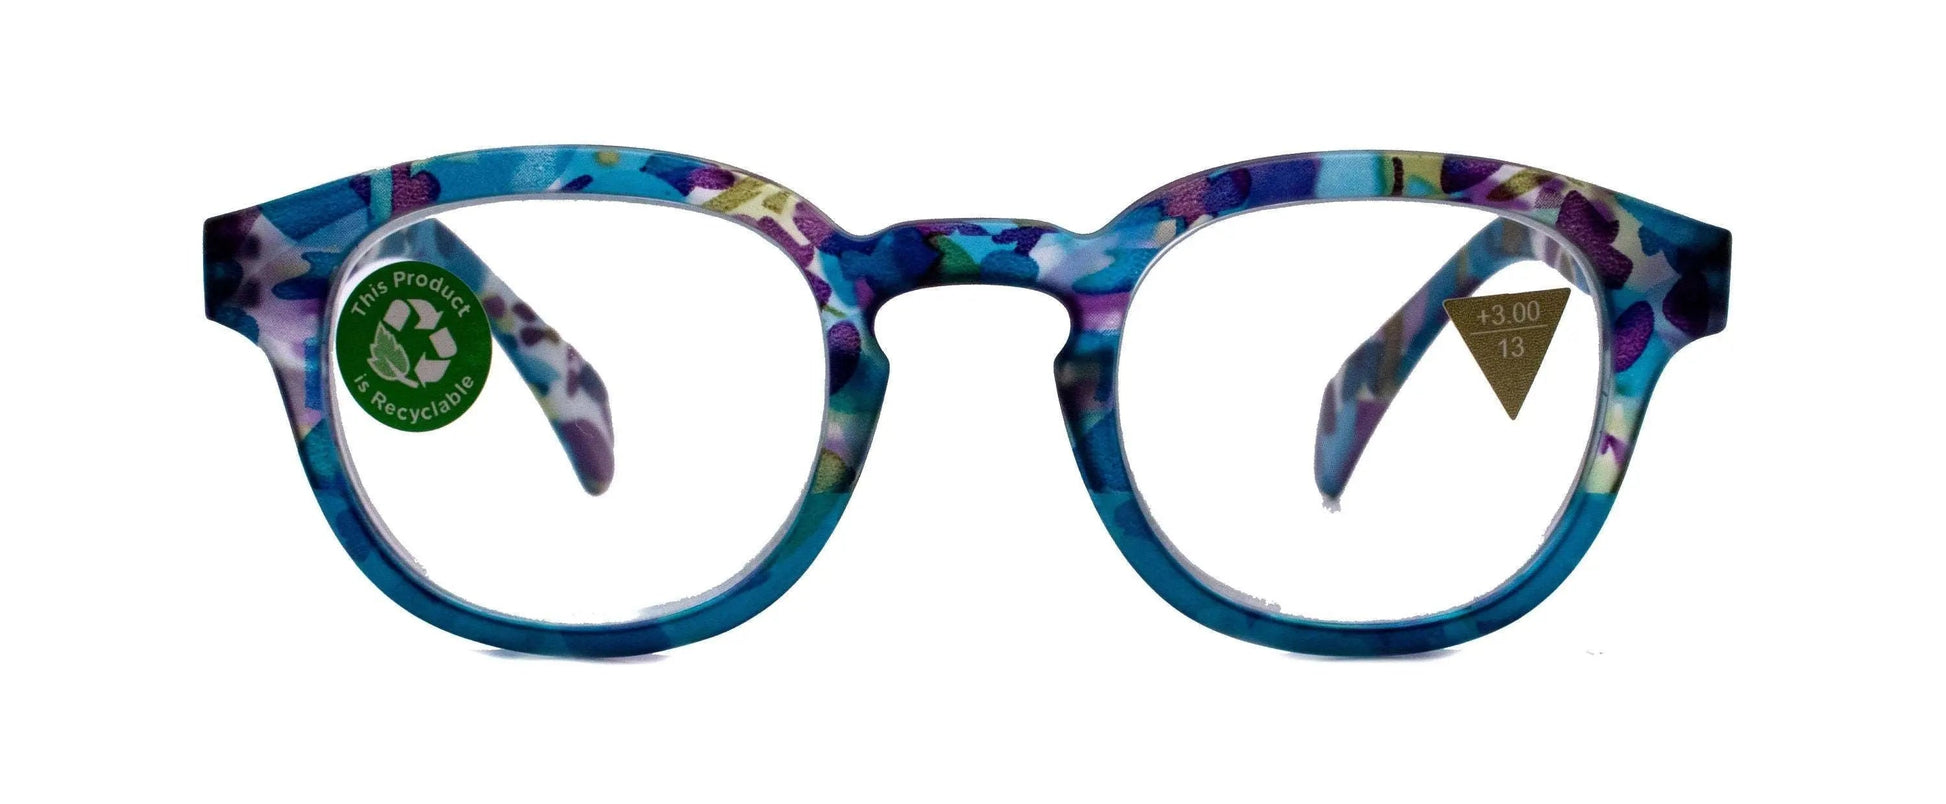 Autumn, (Premium) Reading Glasses, High End Readers +1.25 +1.50..+3.00 Round Style. Optical Frame (Blue, Purple Floral) NY Fifth Avenue.